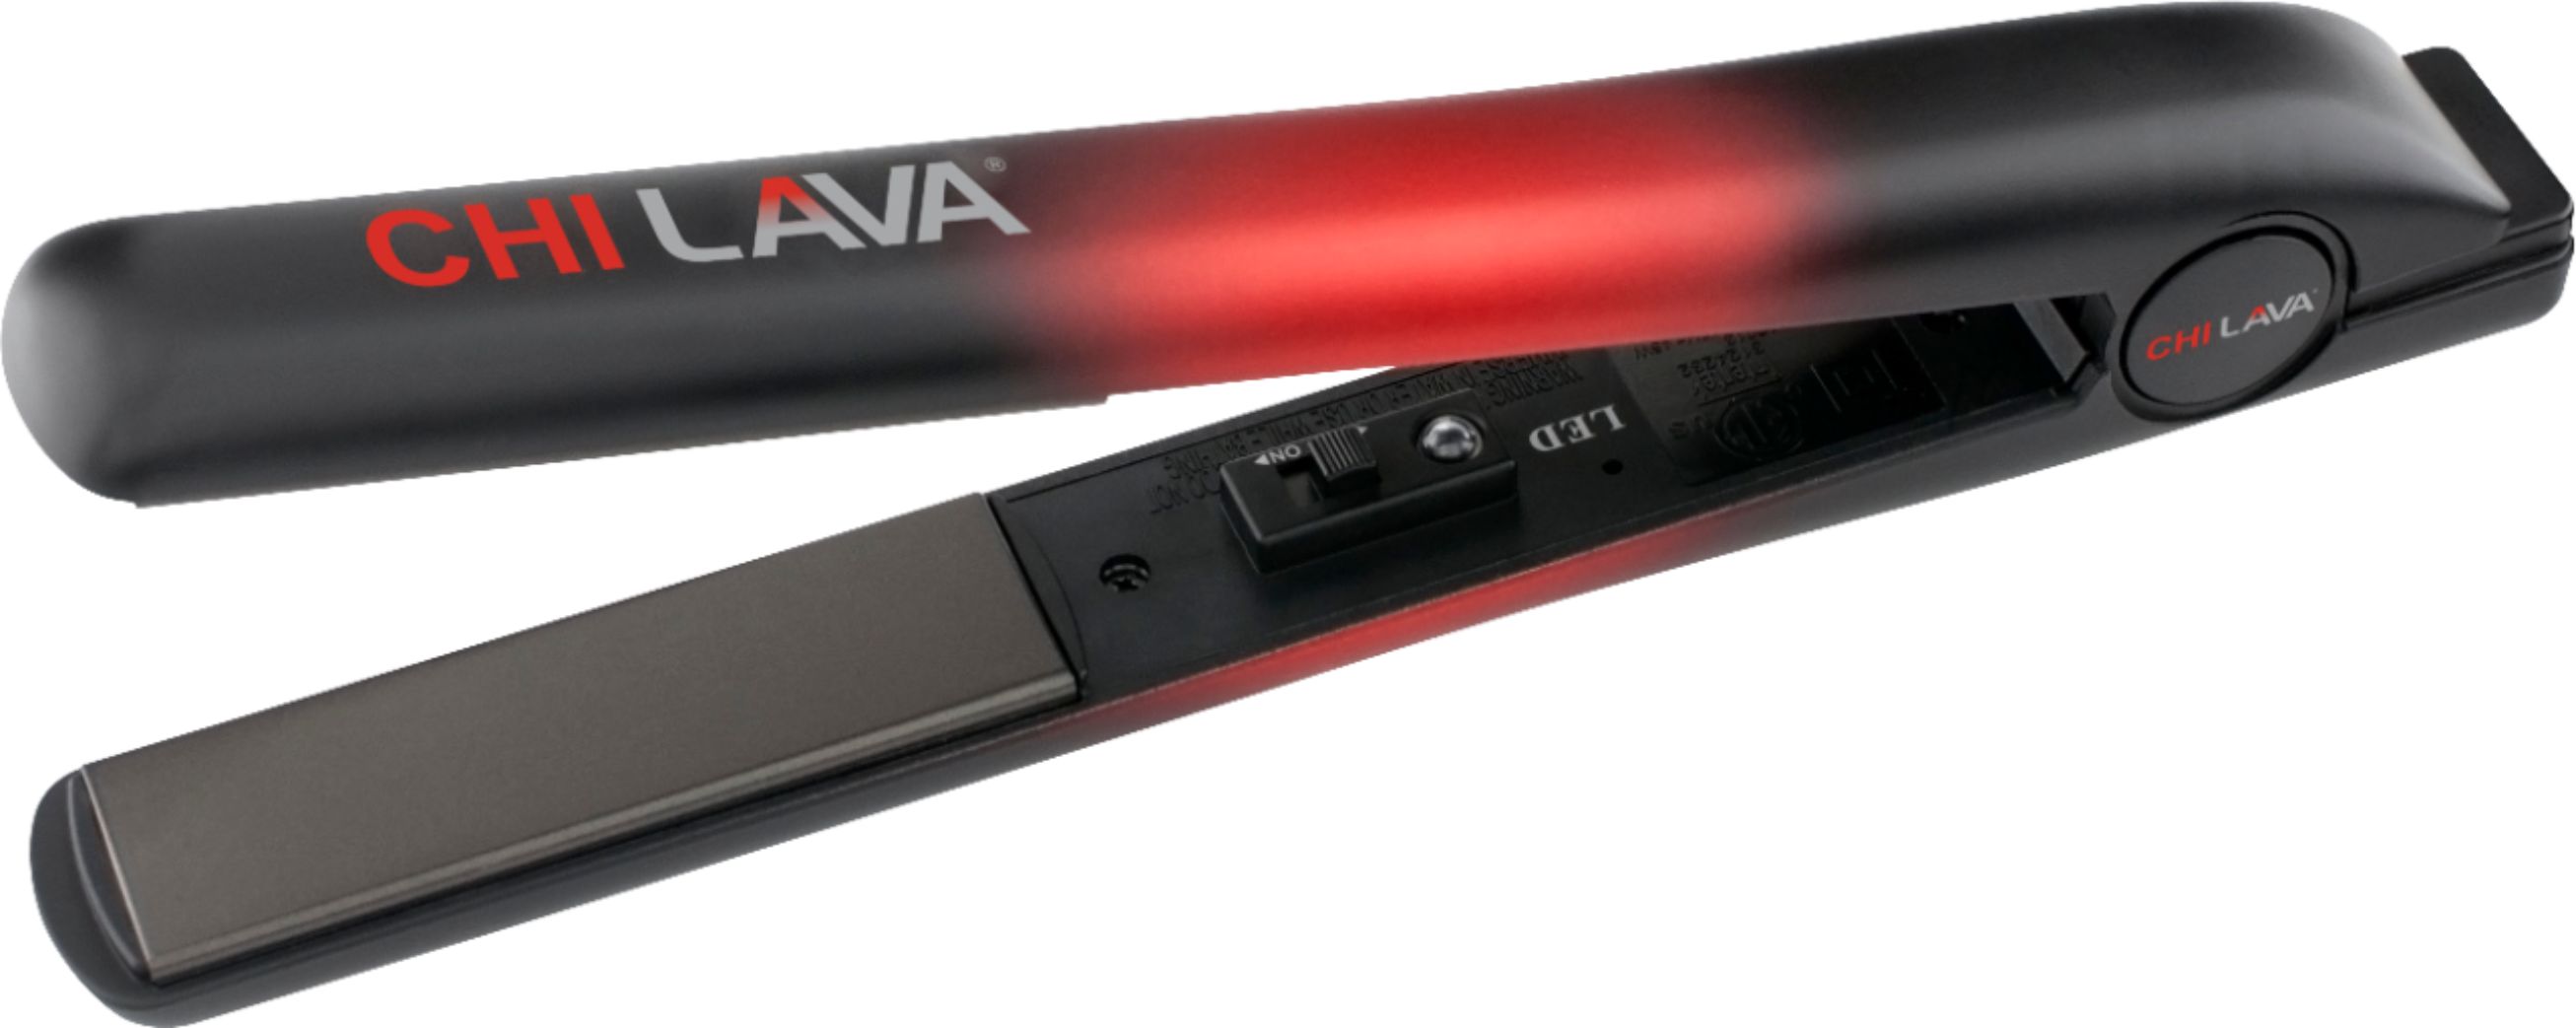 Best good straighteners for curly hair Android/iPhone Apps